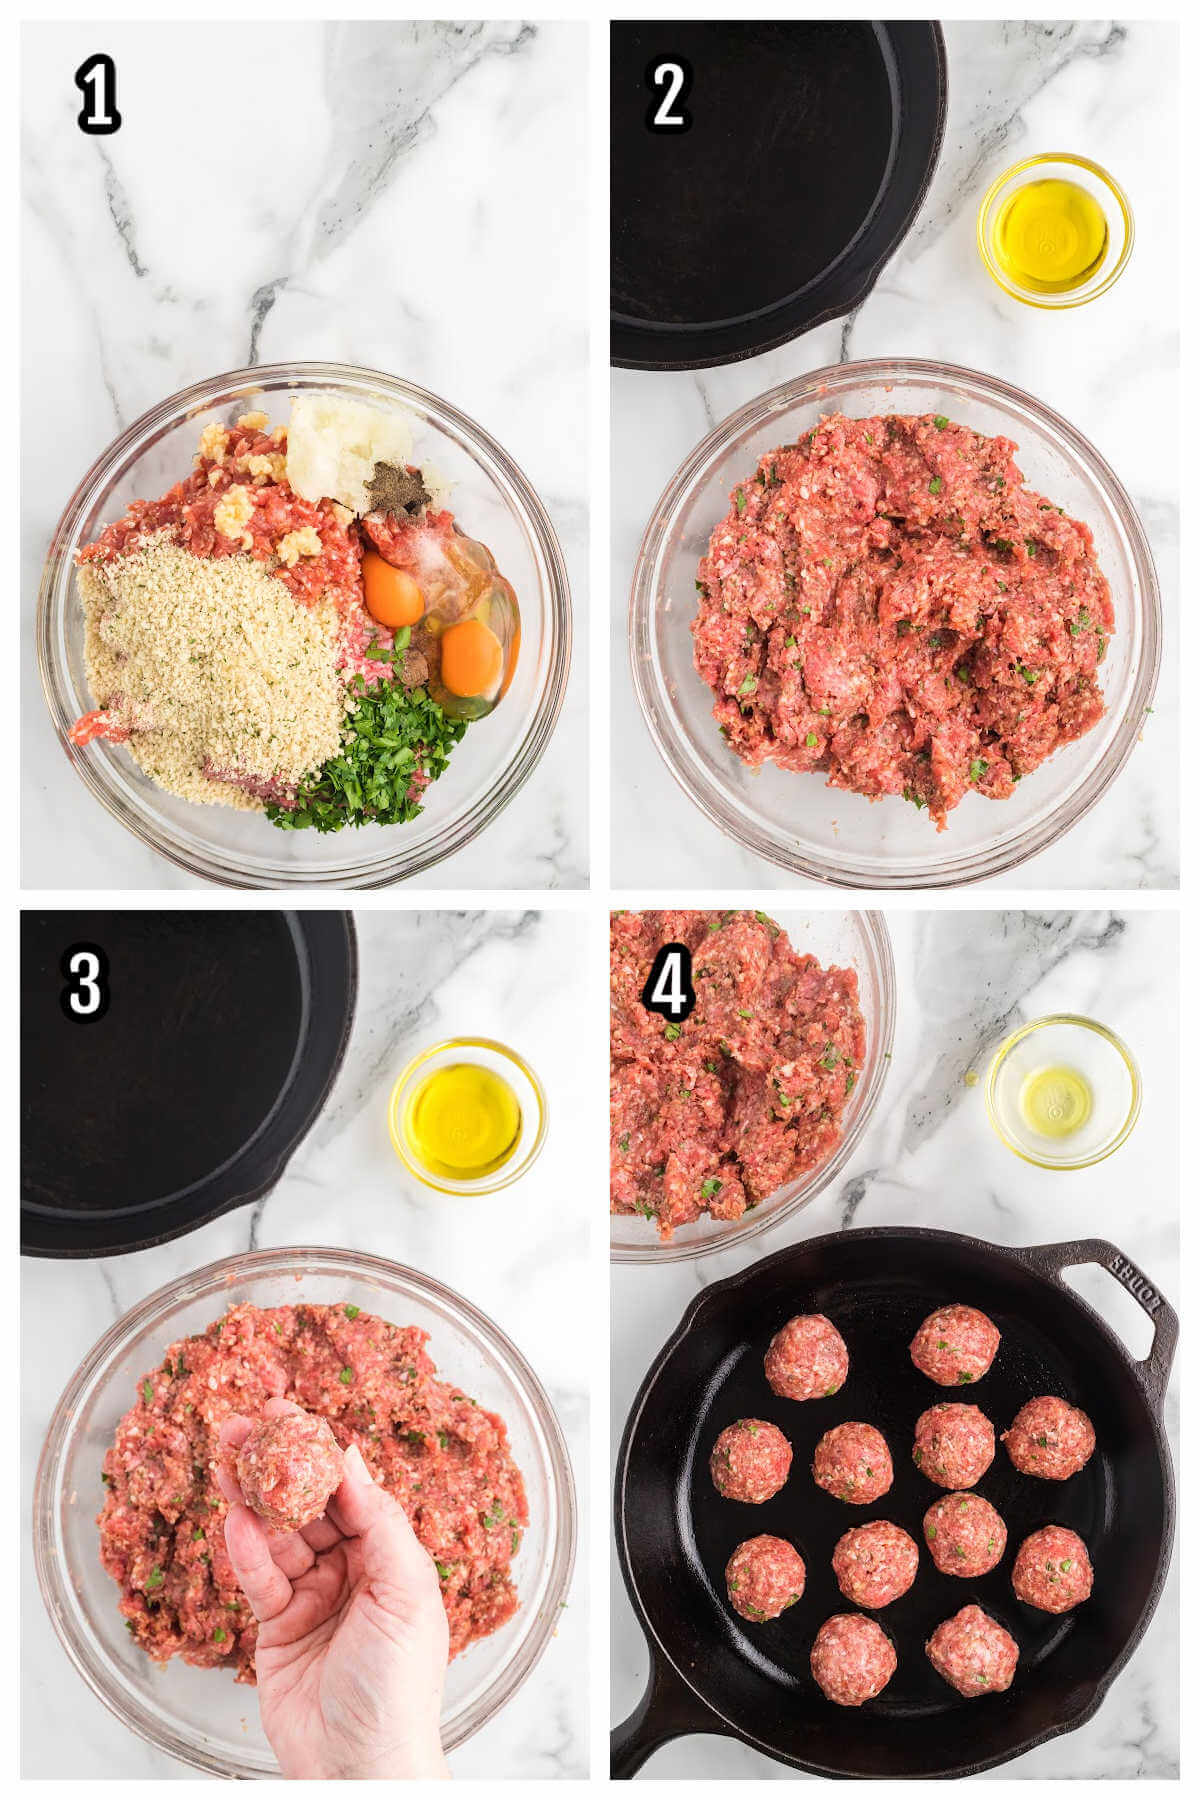 Collage of the first four steps to making the Meatballs and Swedish gravy recipe. 